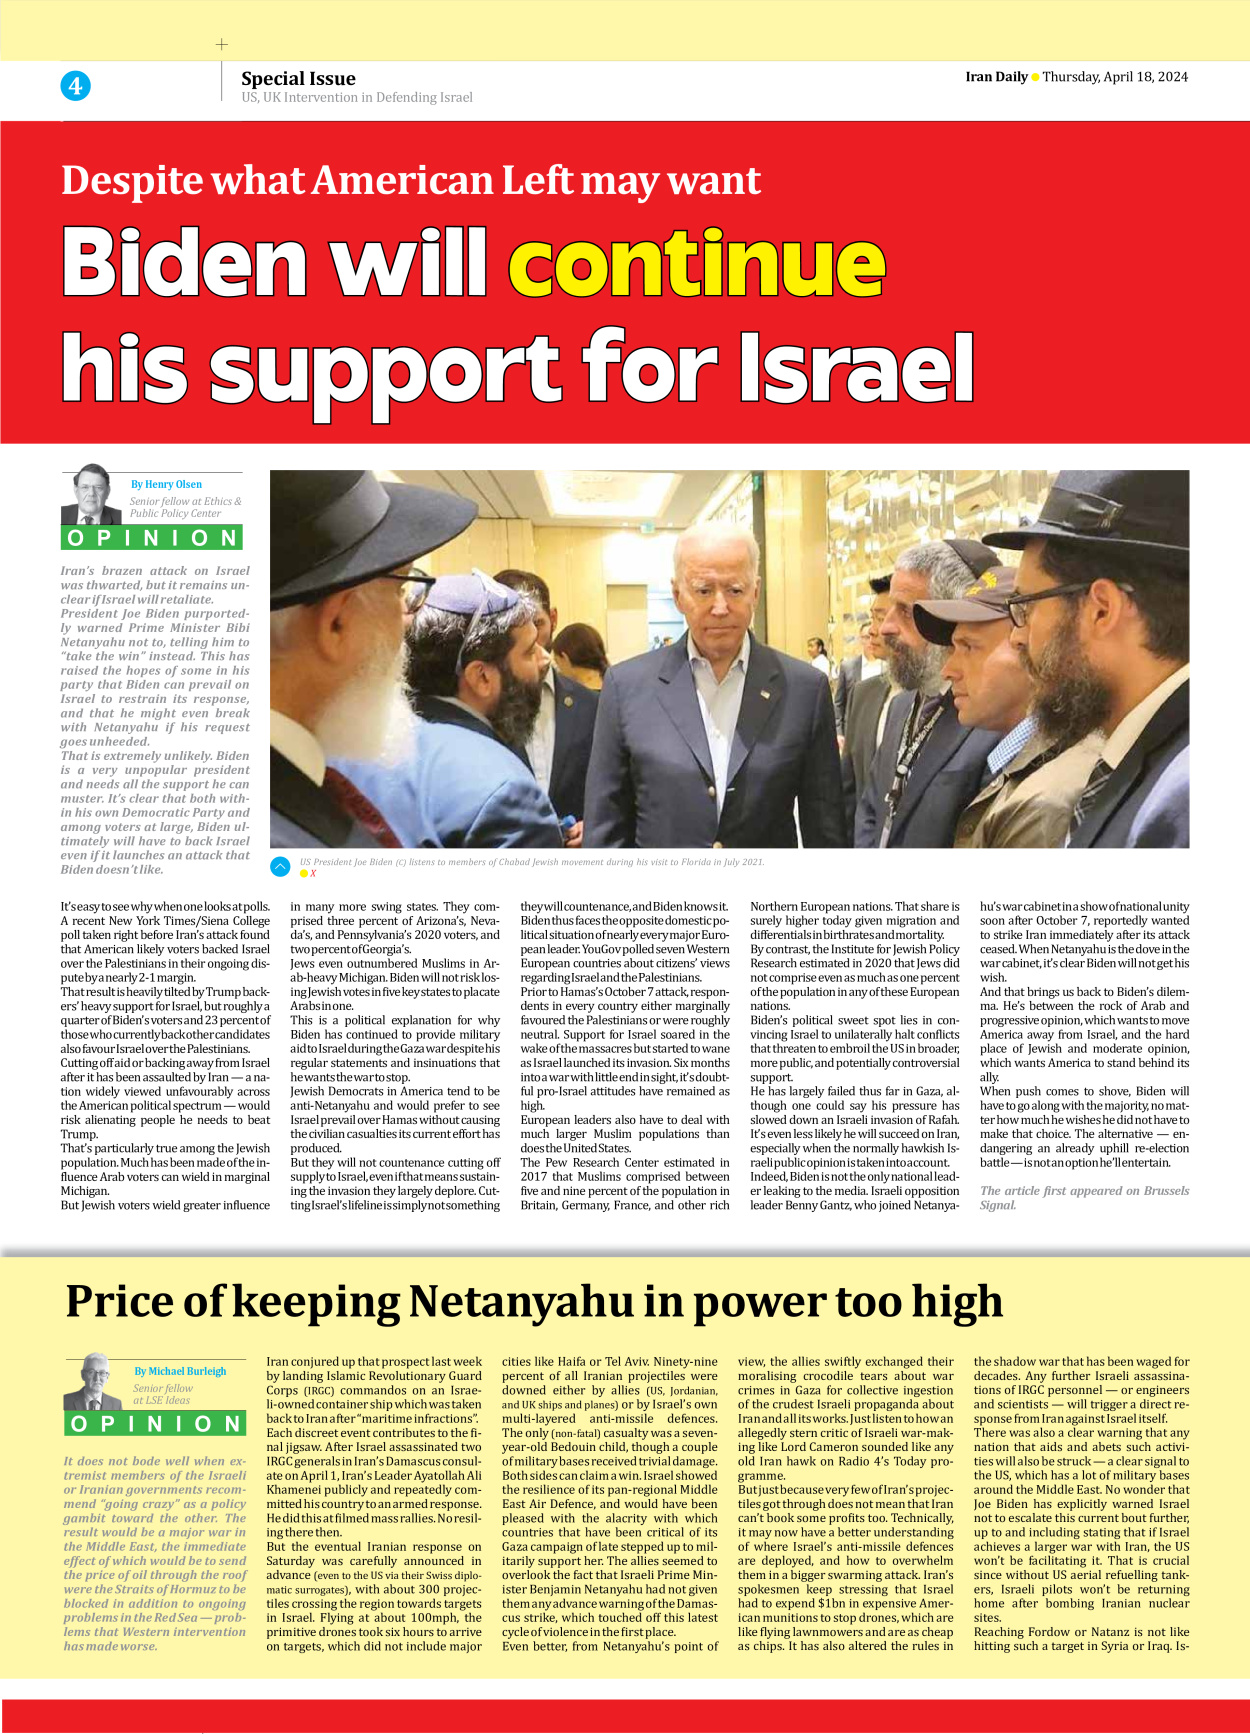 Iran Daily - Number Seven Thousand Five Hundred and Thirty Six - 18 April 2024 - Page 4